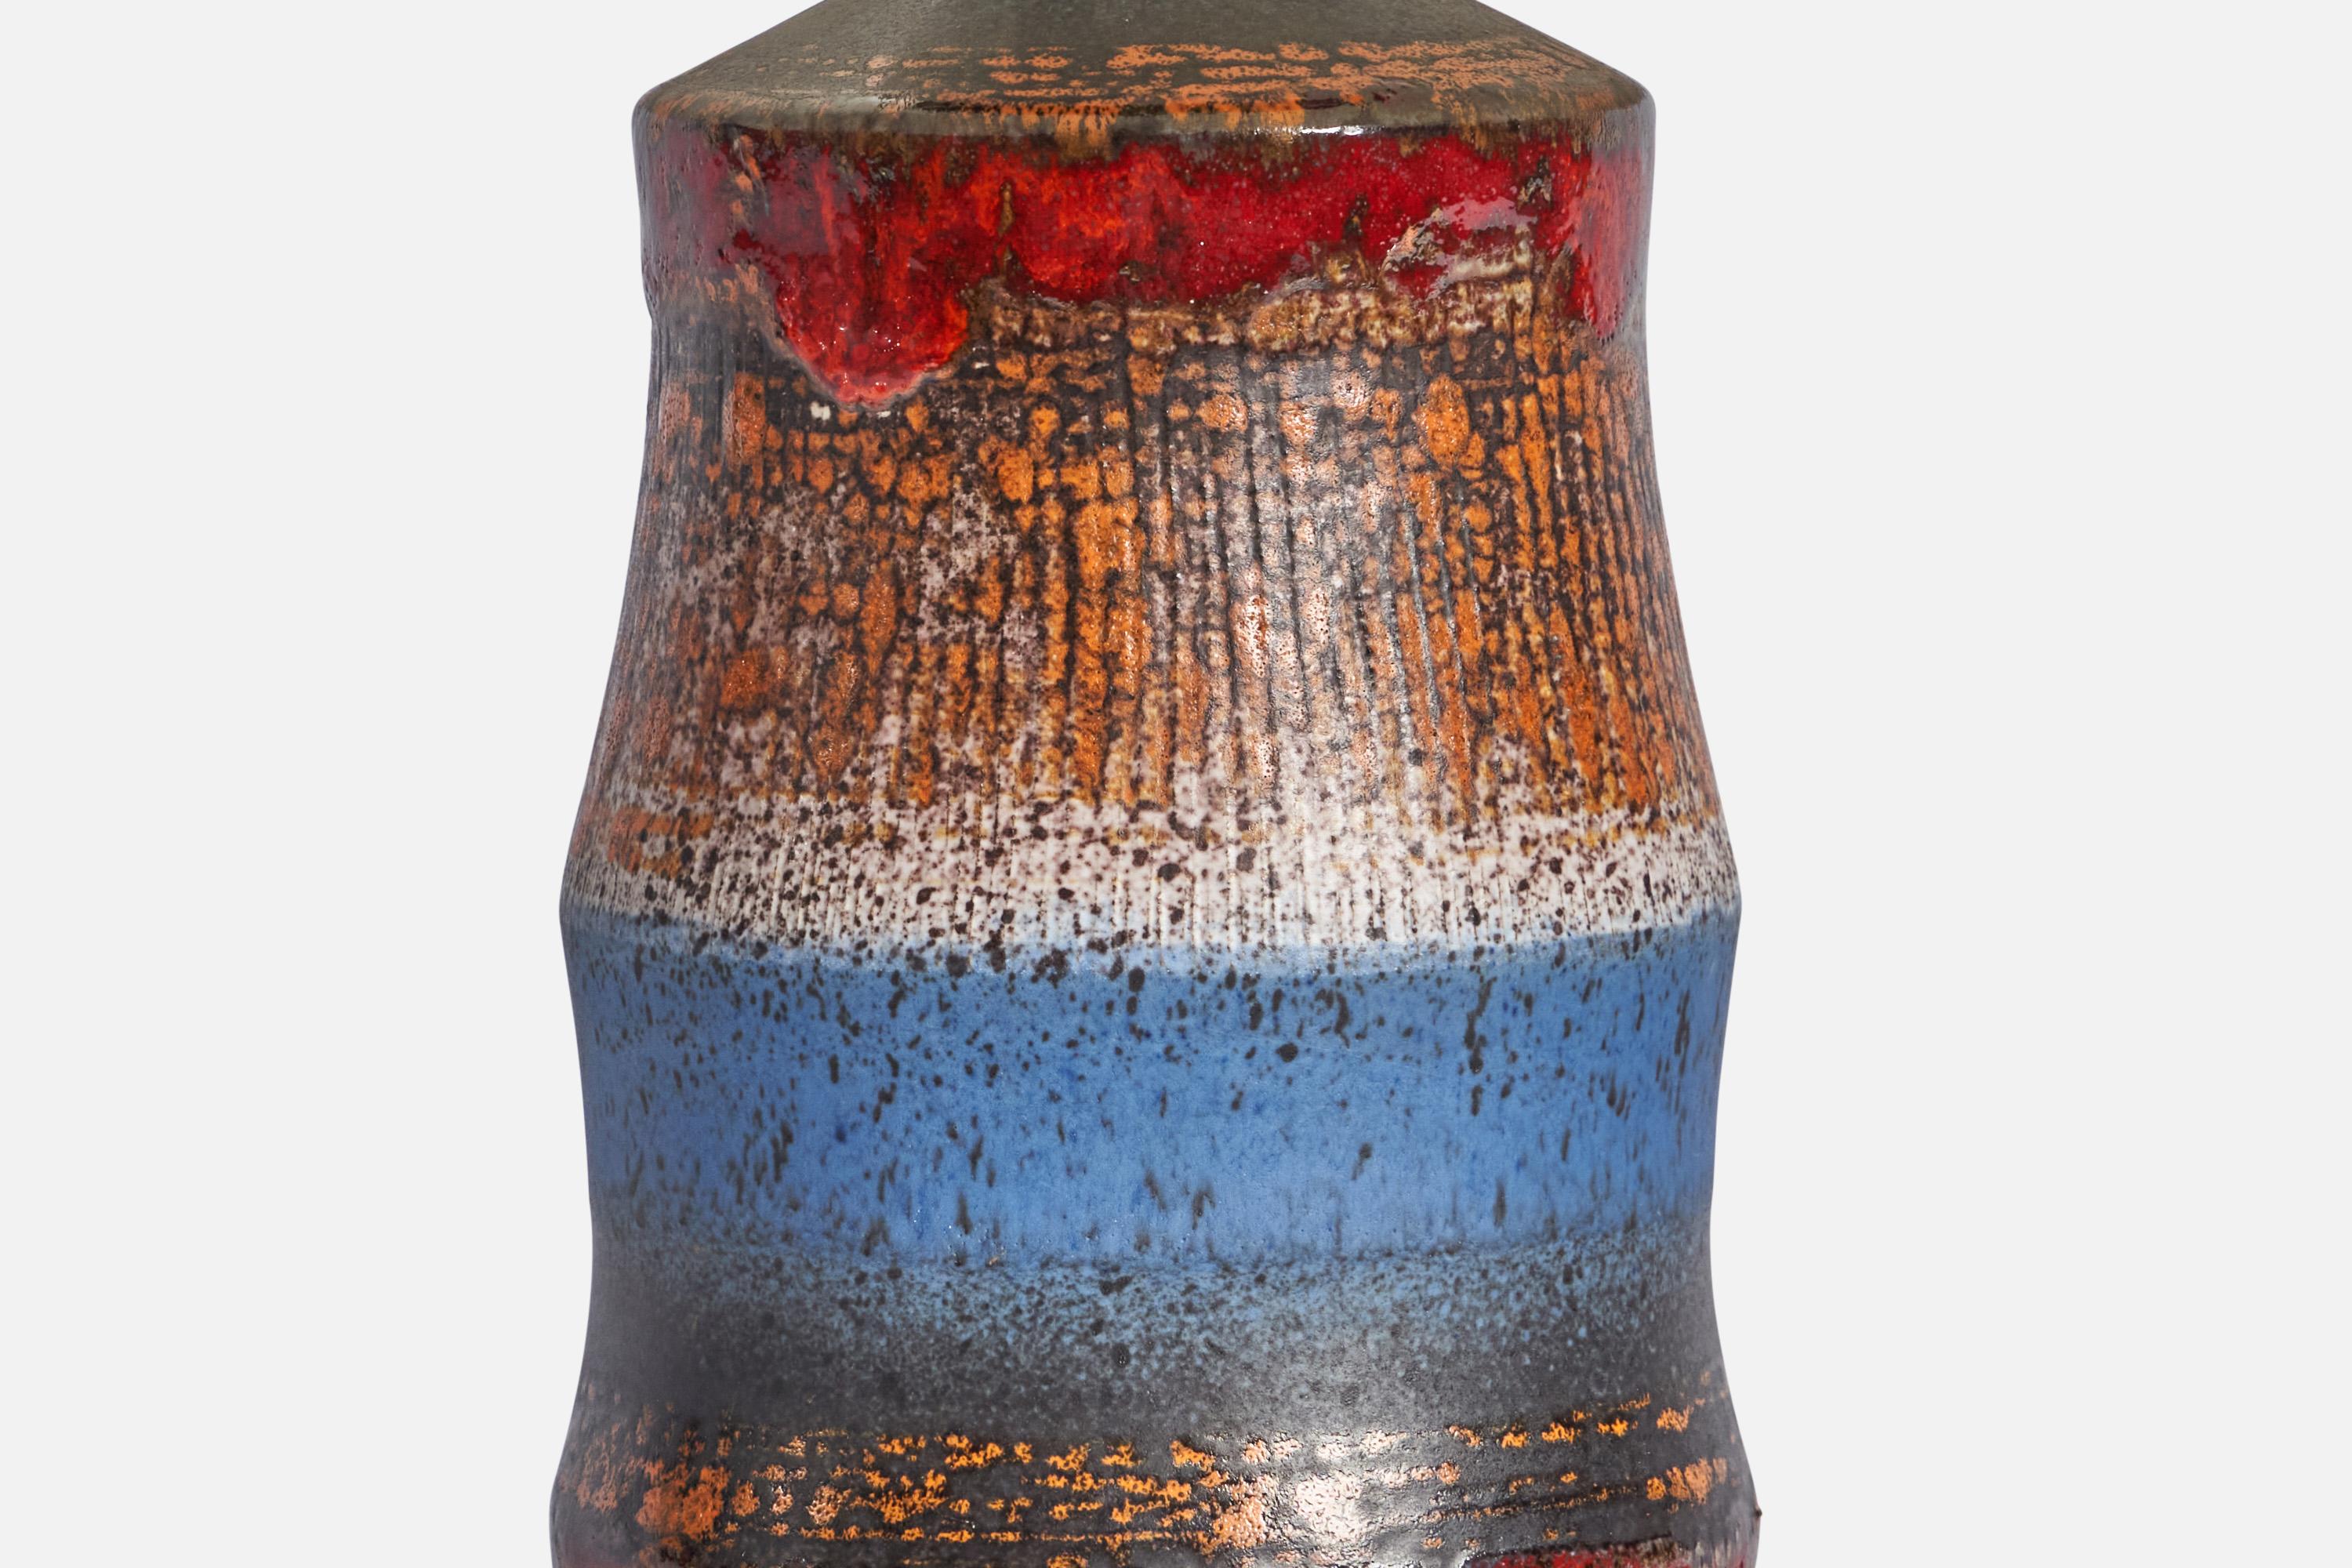 Tilgmans Keramik, Table Lamp, Stoneware, Sweden, 1960s In Good Condition For Sale In High Point, NC